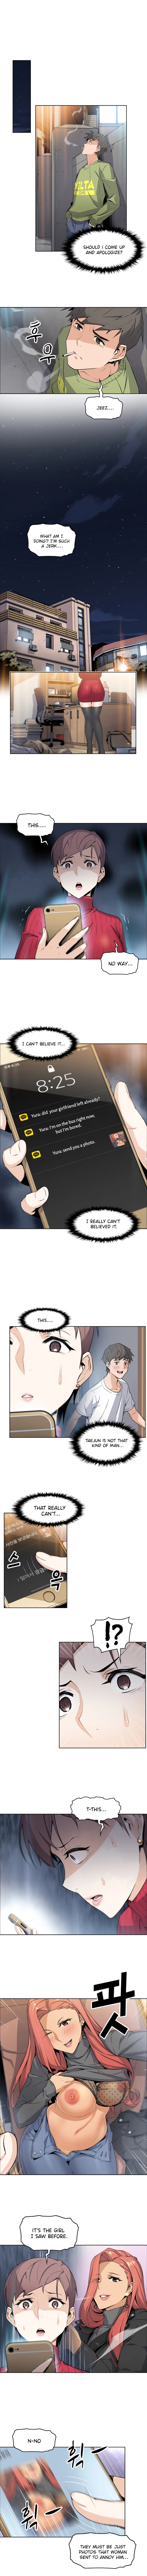 Housekeeper Manhwa - Chapter 5 Page 5